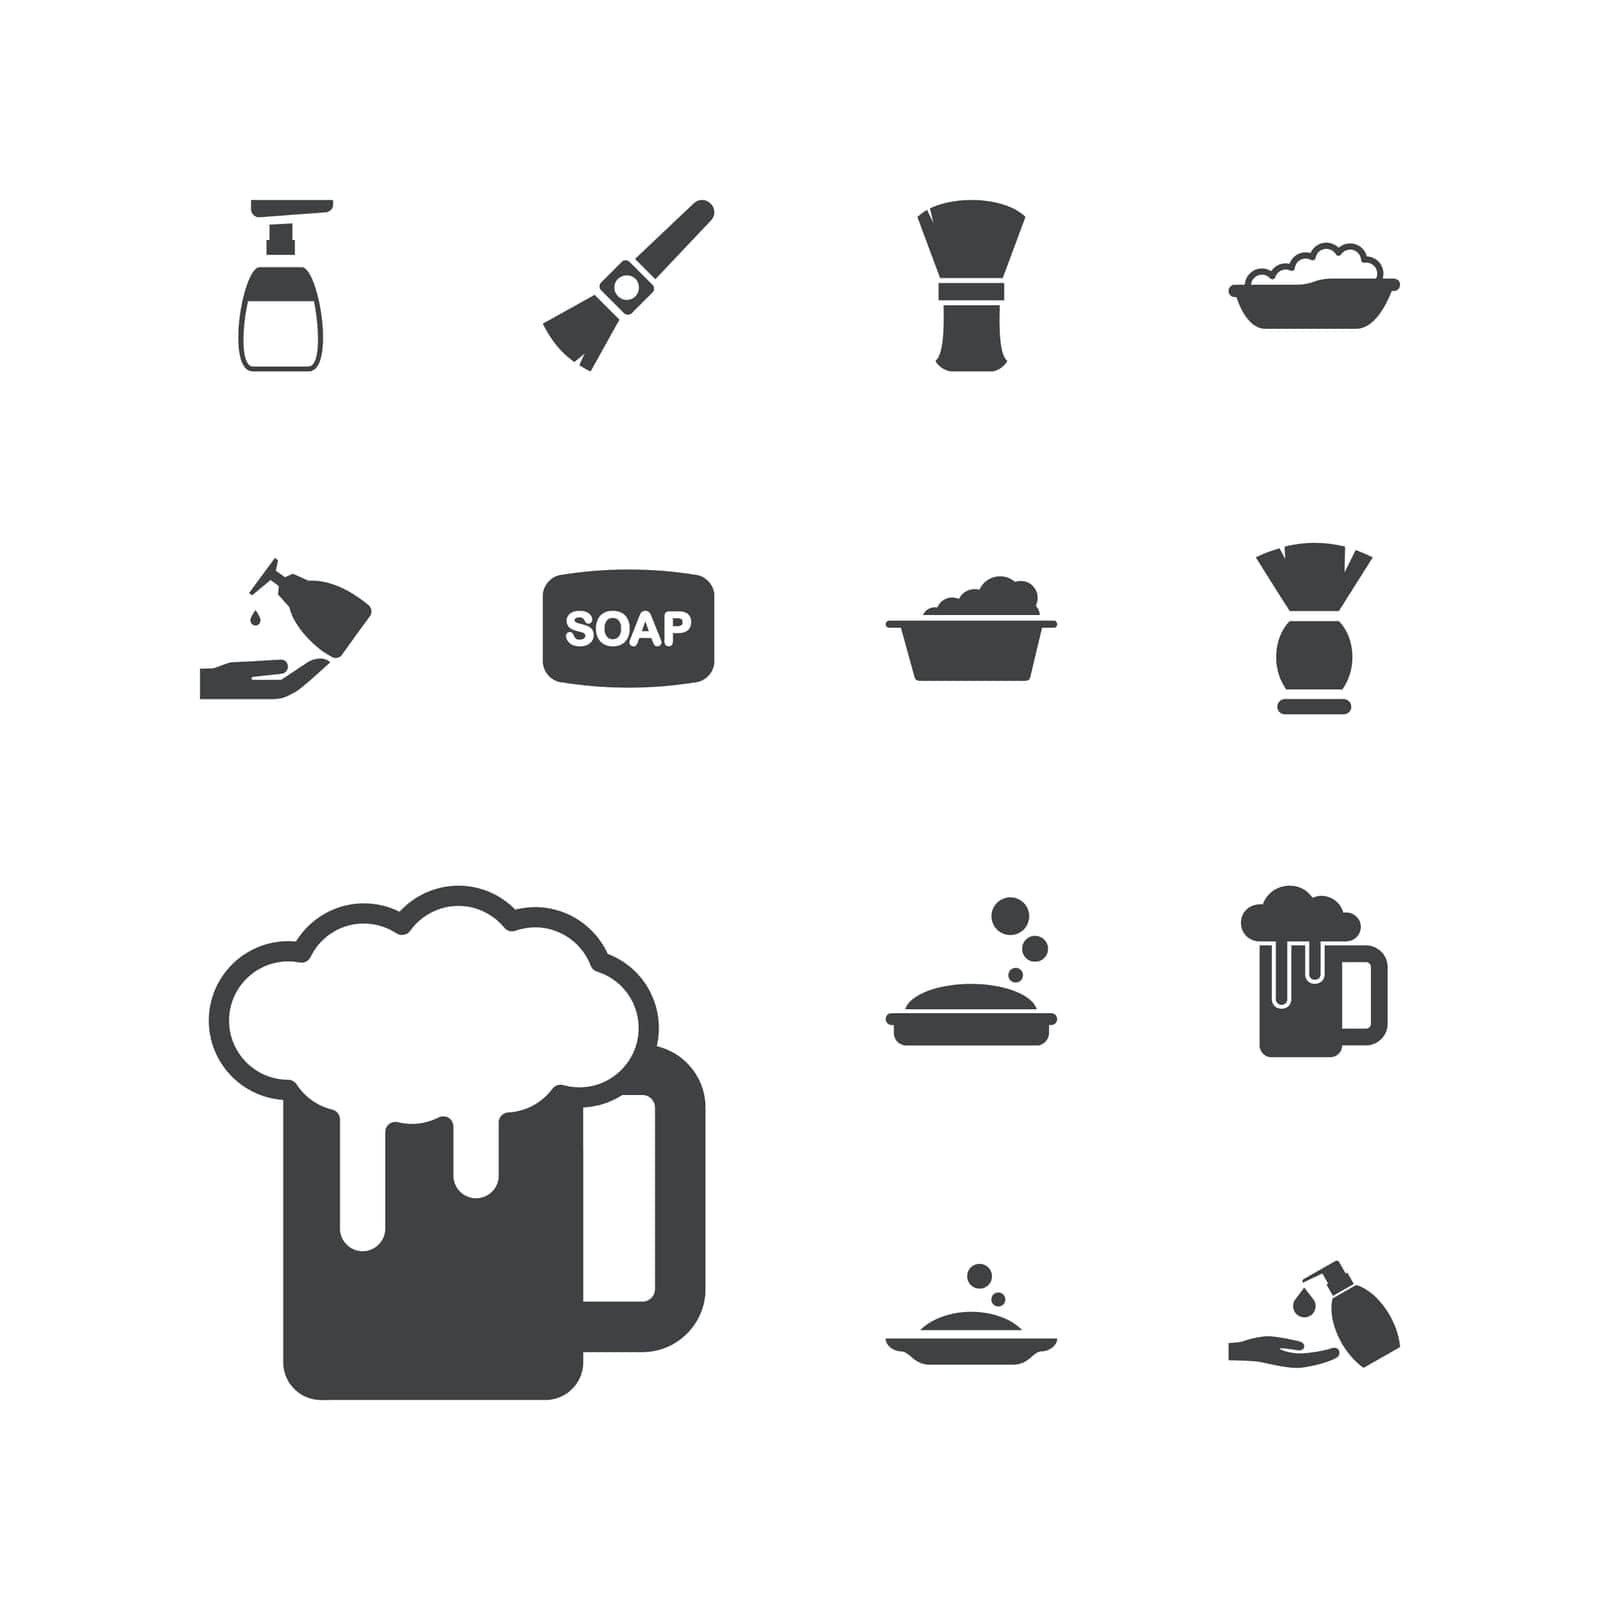 symbol,beauty,foam,icon,sign,skin,isolated,for,hair,white,bubble,web,laundry,hygiene,and,design,vector,bath,graphic,beer,brush,set,wash,mobile,health,shaving,clean,water,face,plastic,liquid,background,baby,illustration,mug,soap,object,care by ogqcorp